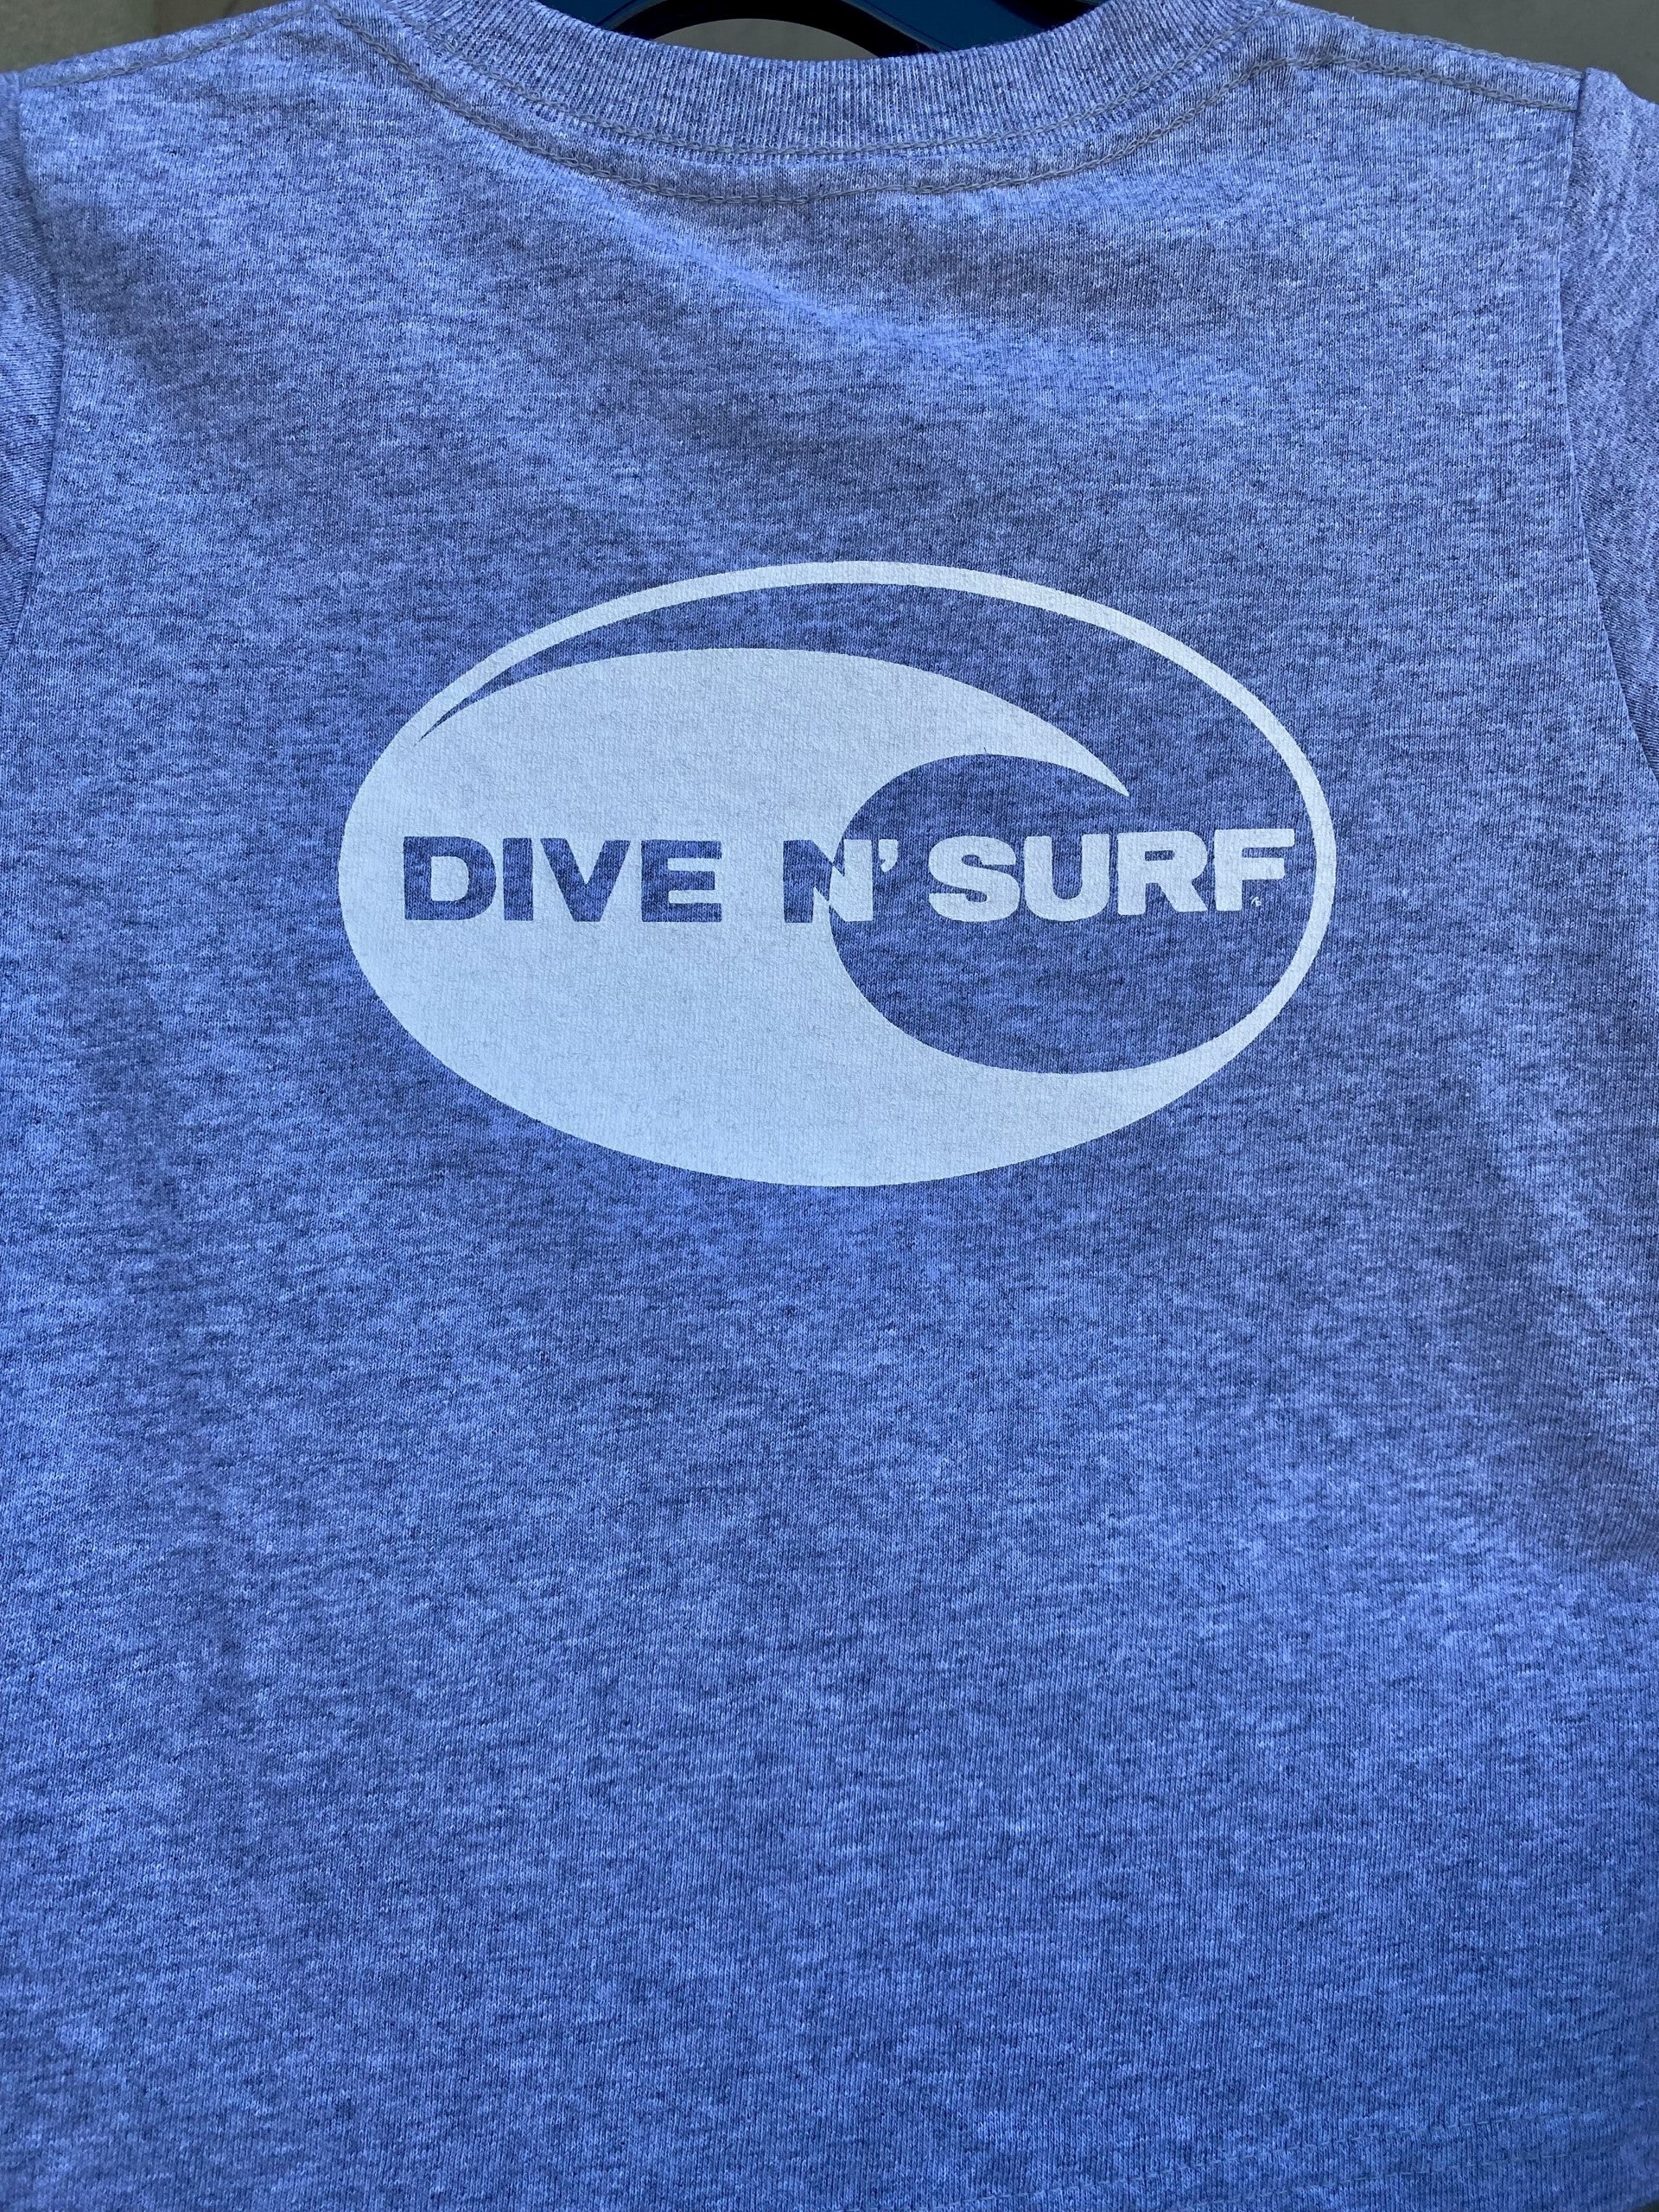 Spearfishing - Dive N' Surf